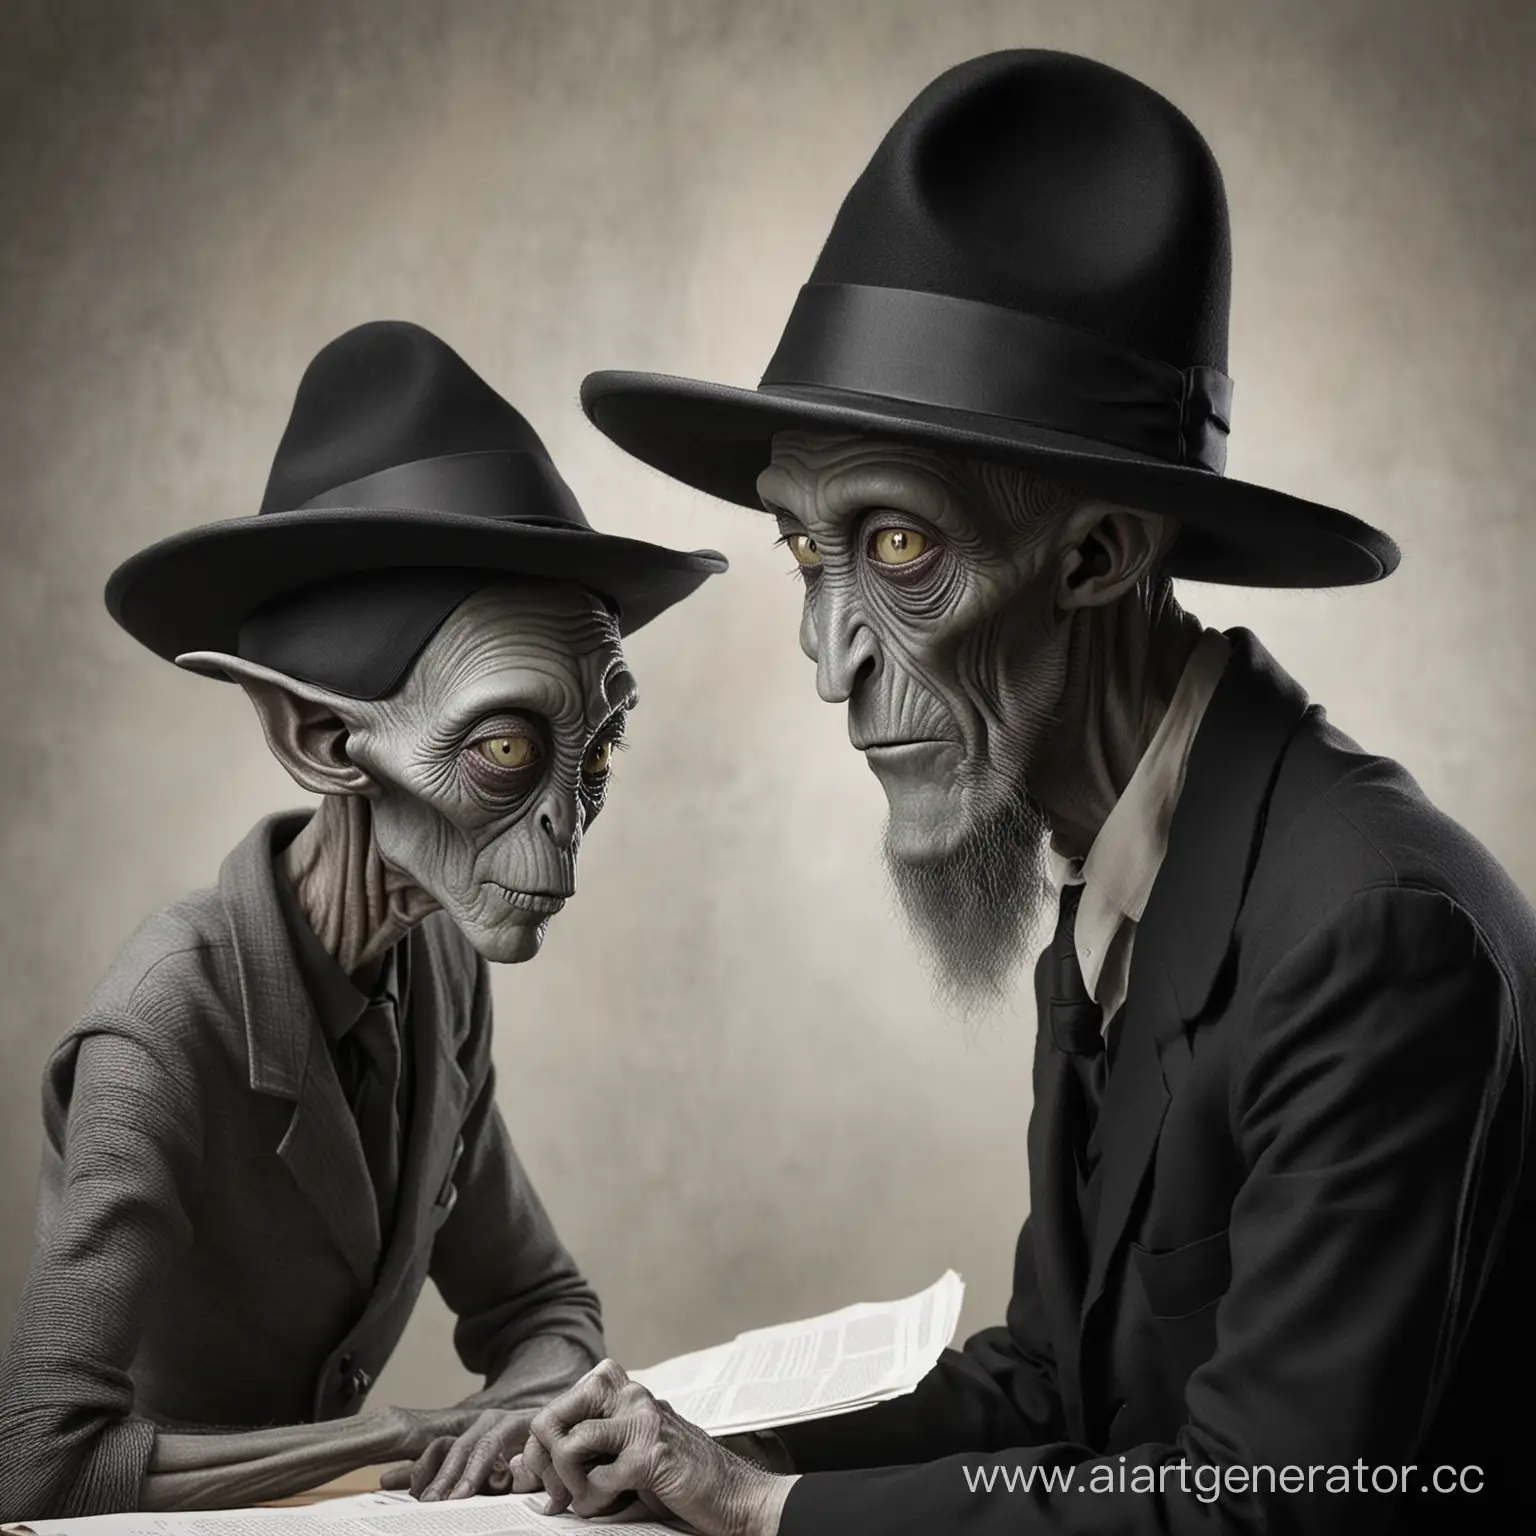 Gray-Alien-Conspires-with-Orthodox-Jew-in-Black-Hat